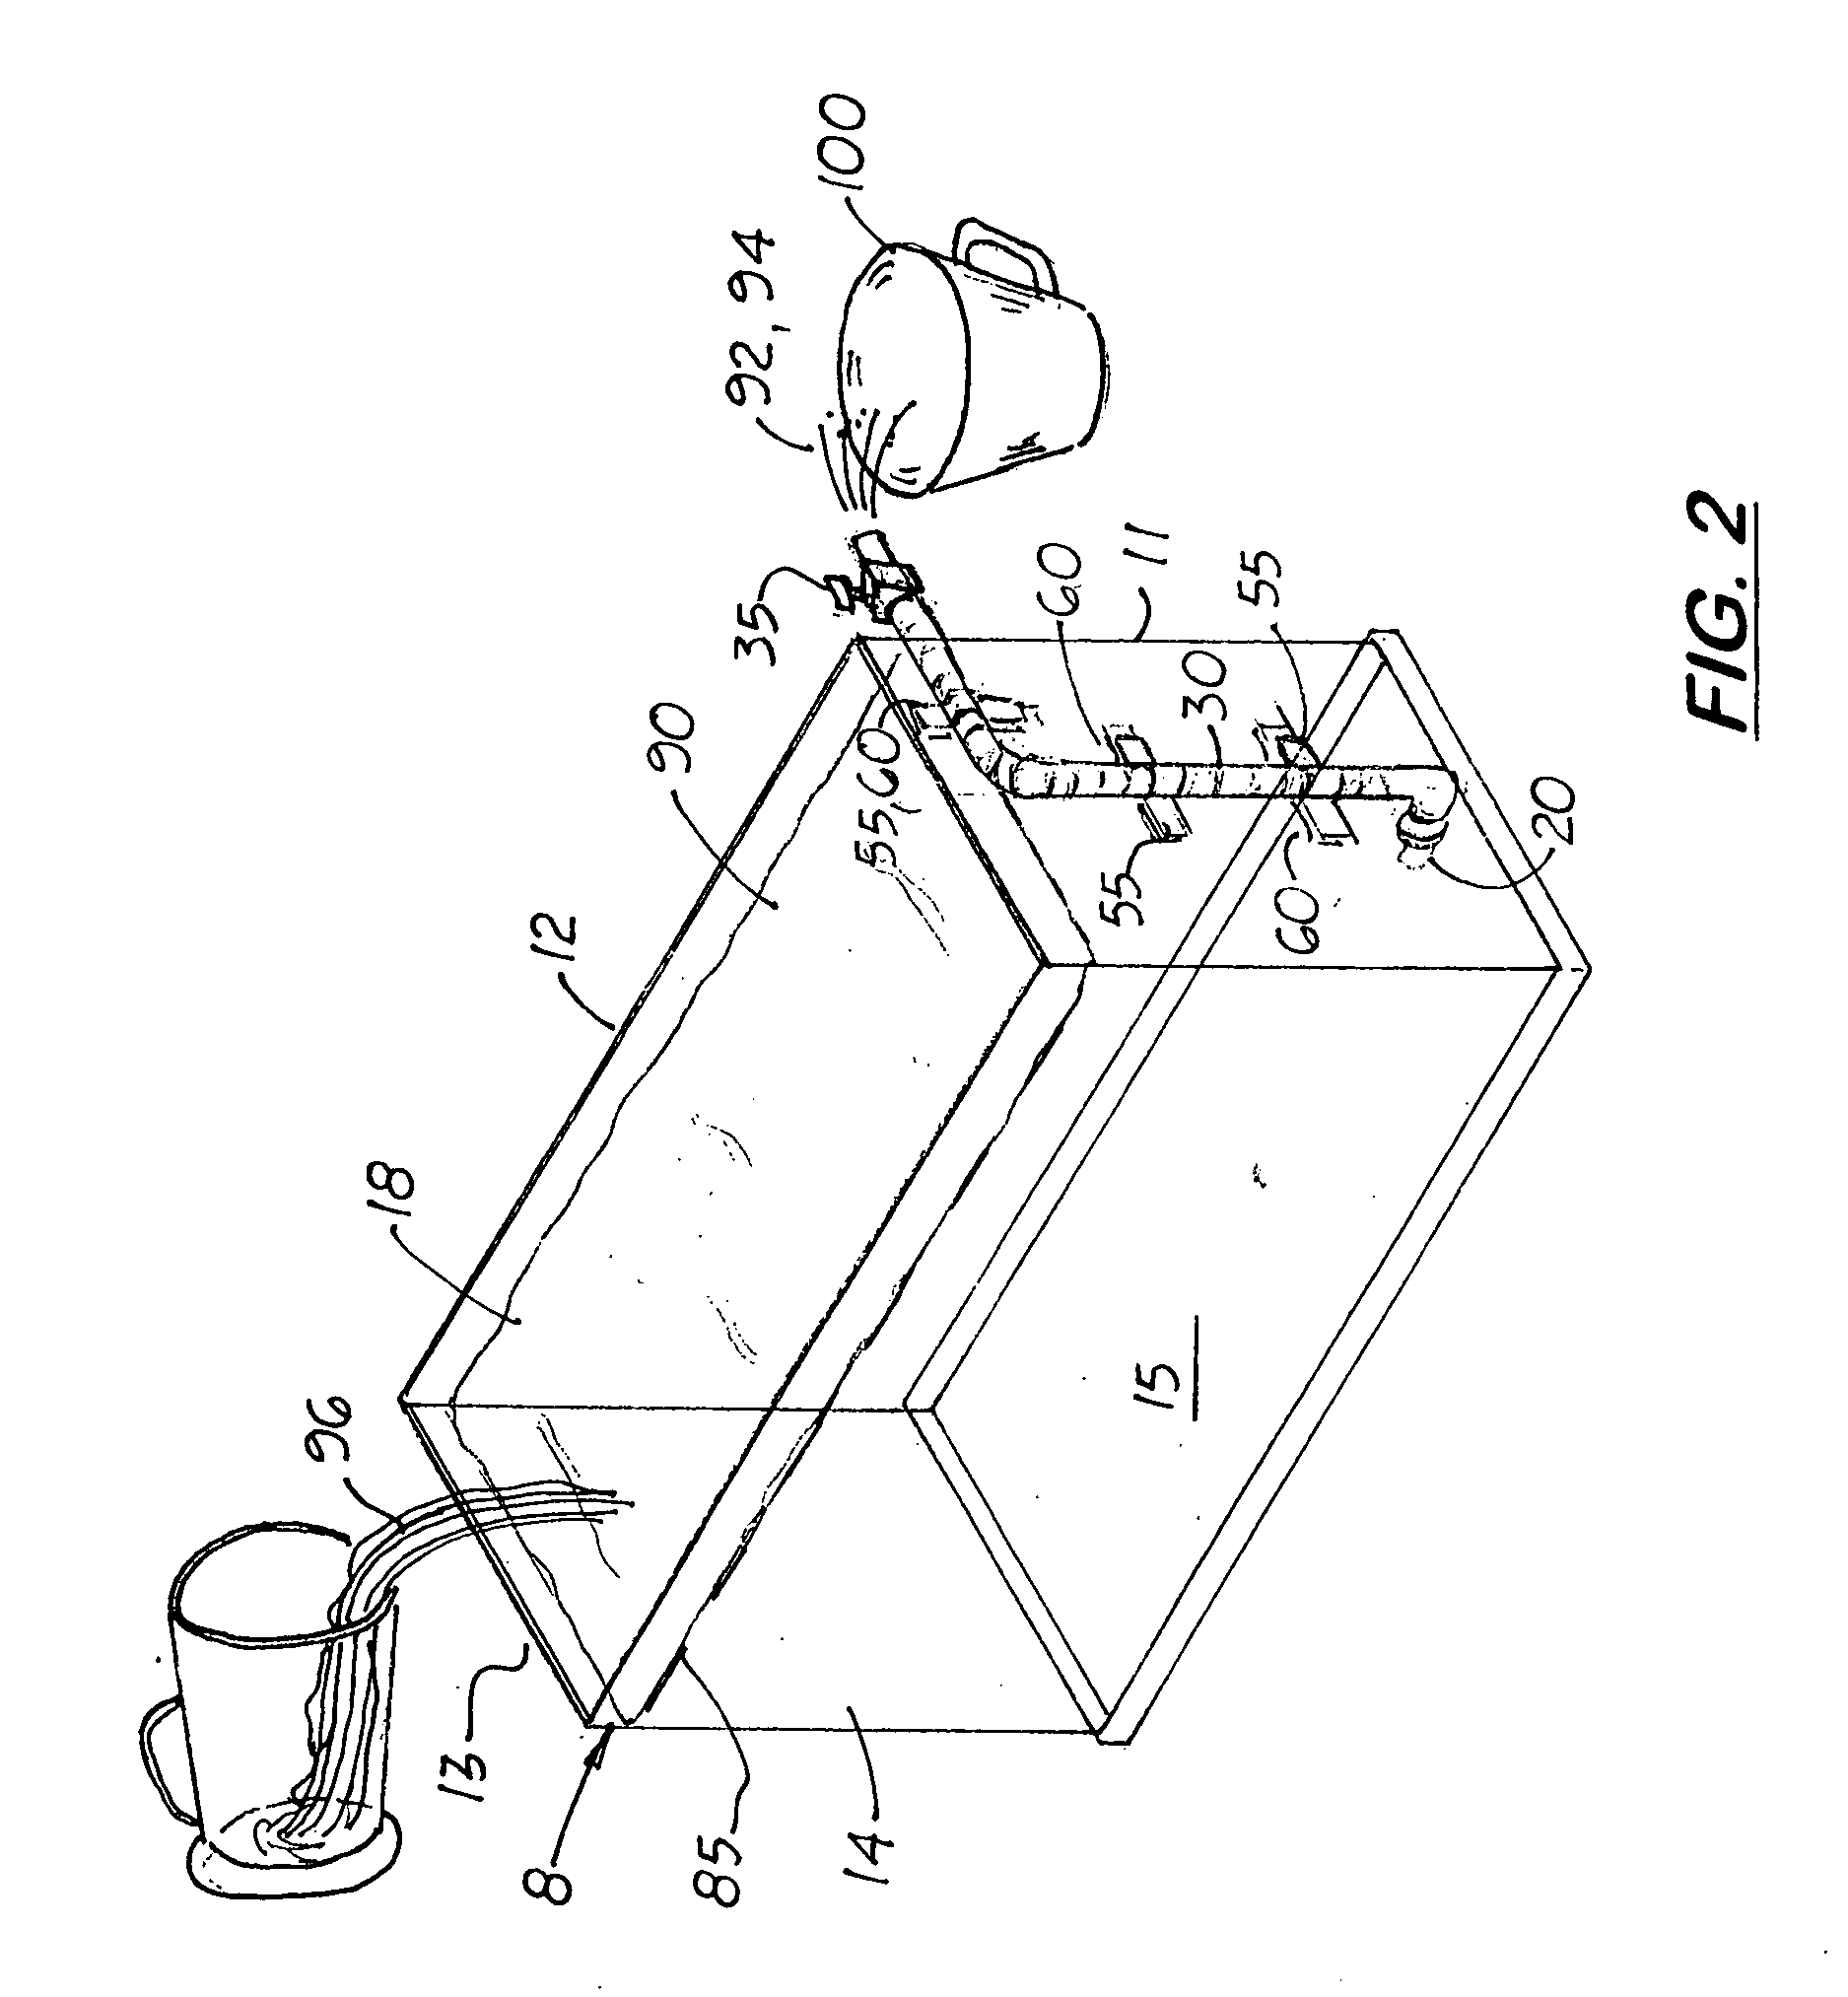 Fish tank with integrated gravity assisted cleaning apparatus